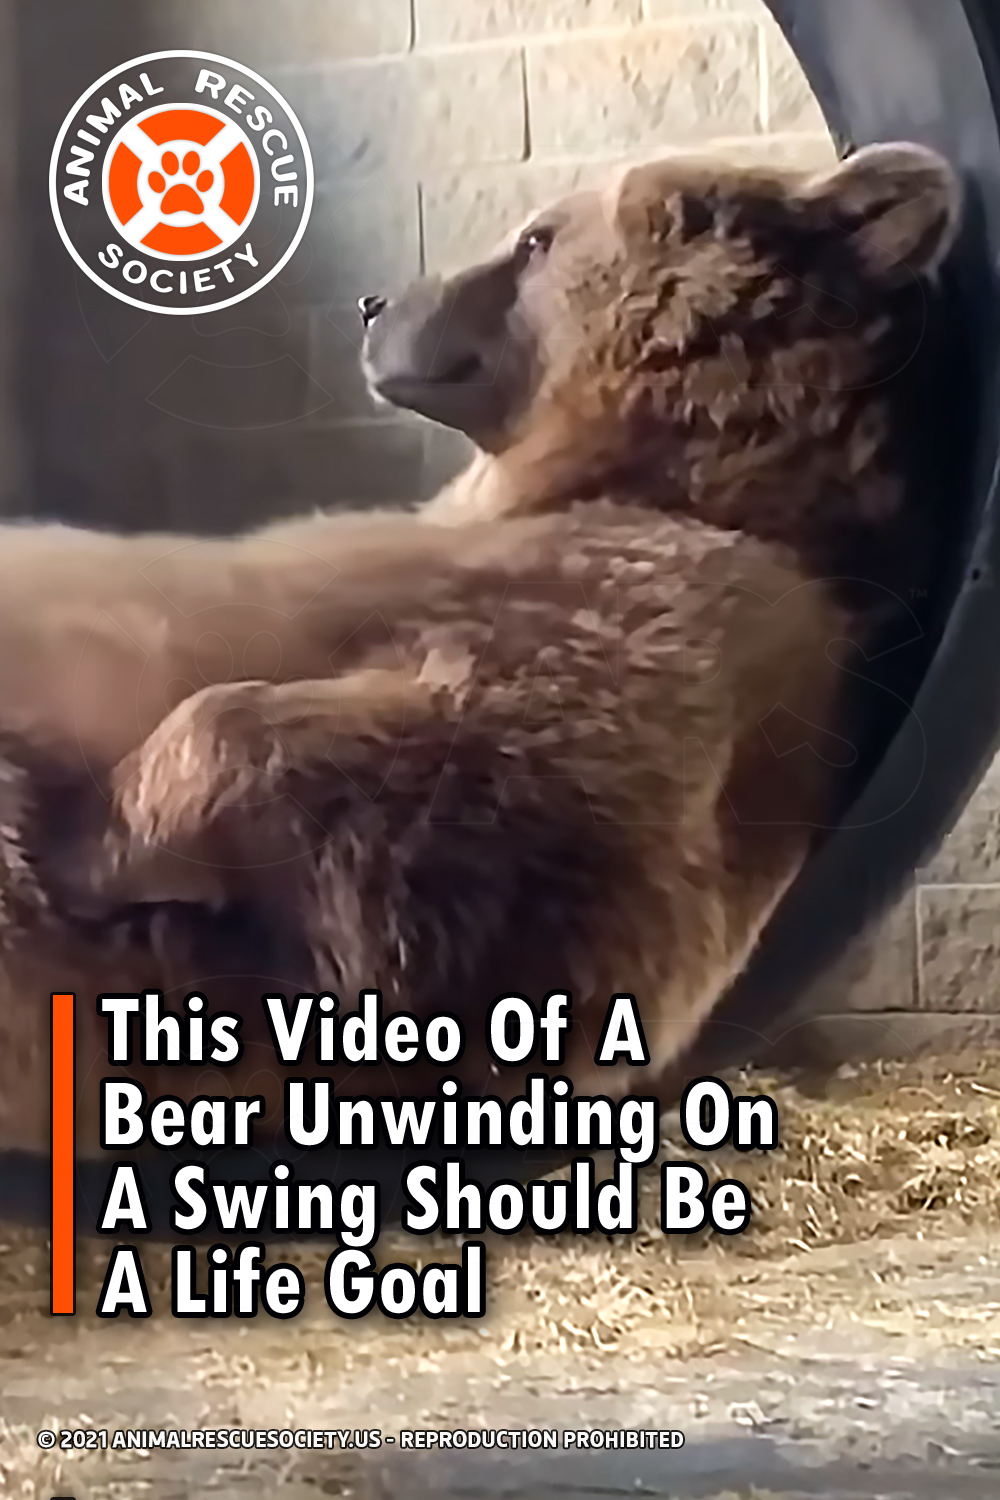 This Video Of A Bear Unwinding On A Swing Should Be A Life Goal